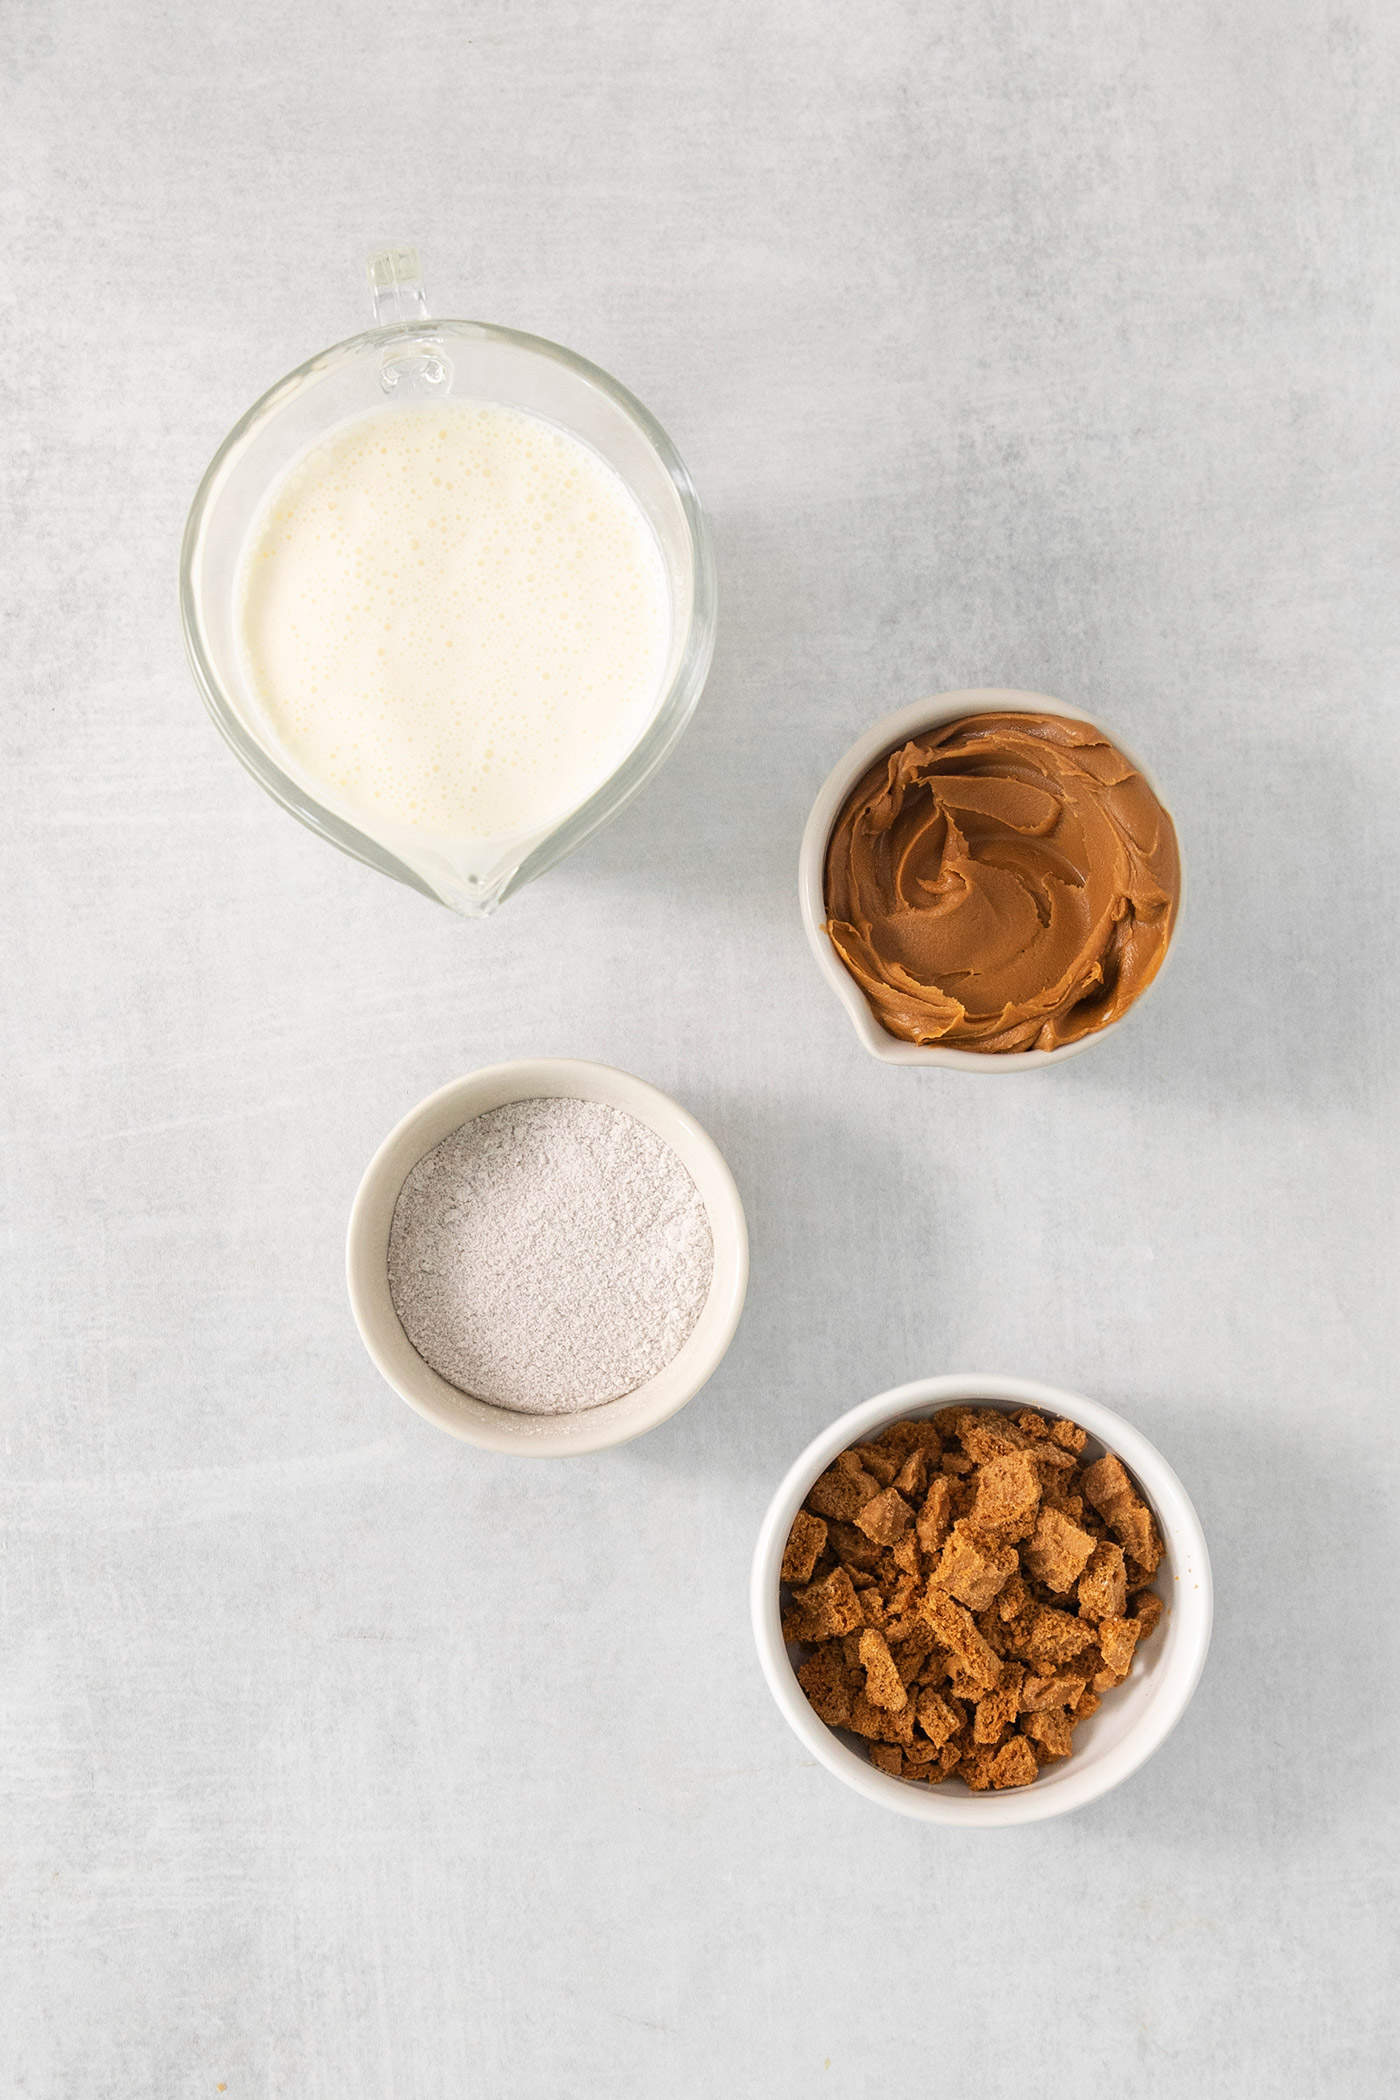 Ingredients for butterscotch whipped cream are shown on a white background: heavy cream, sugar, butterscotch pudding, and cookies.